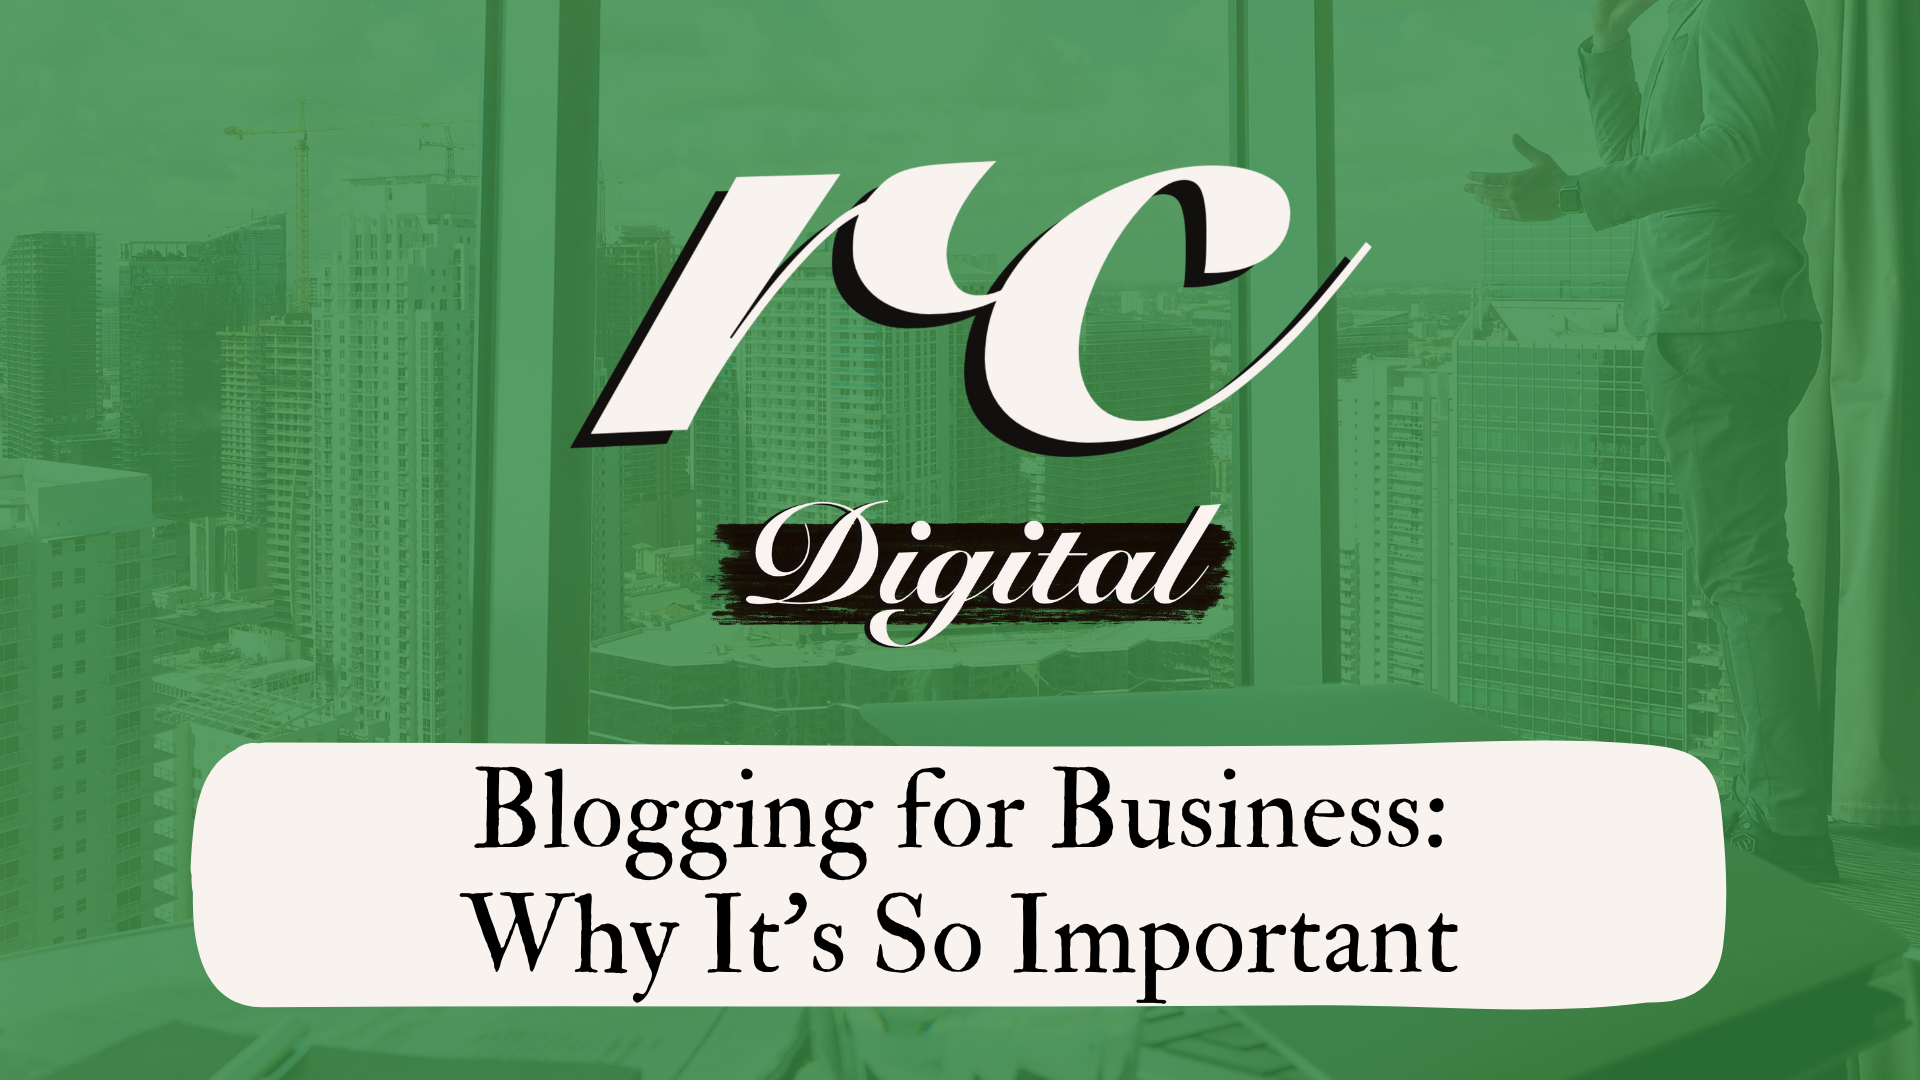 Blogging for Business - Why it's So Important